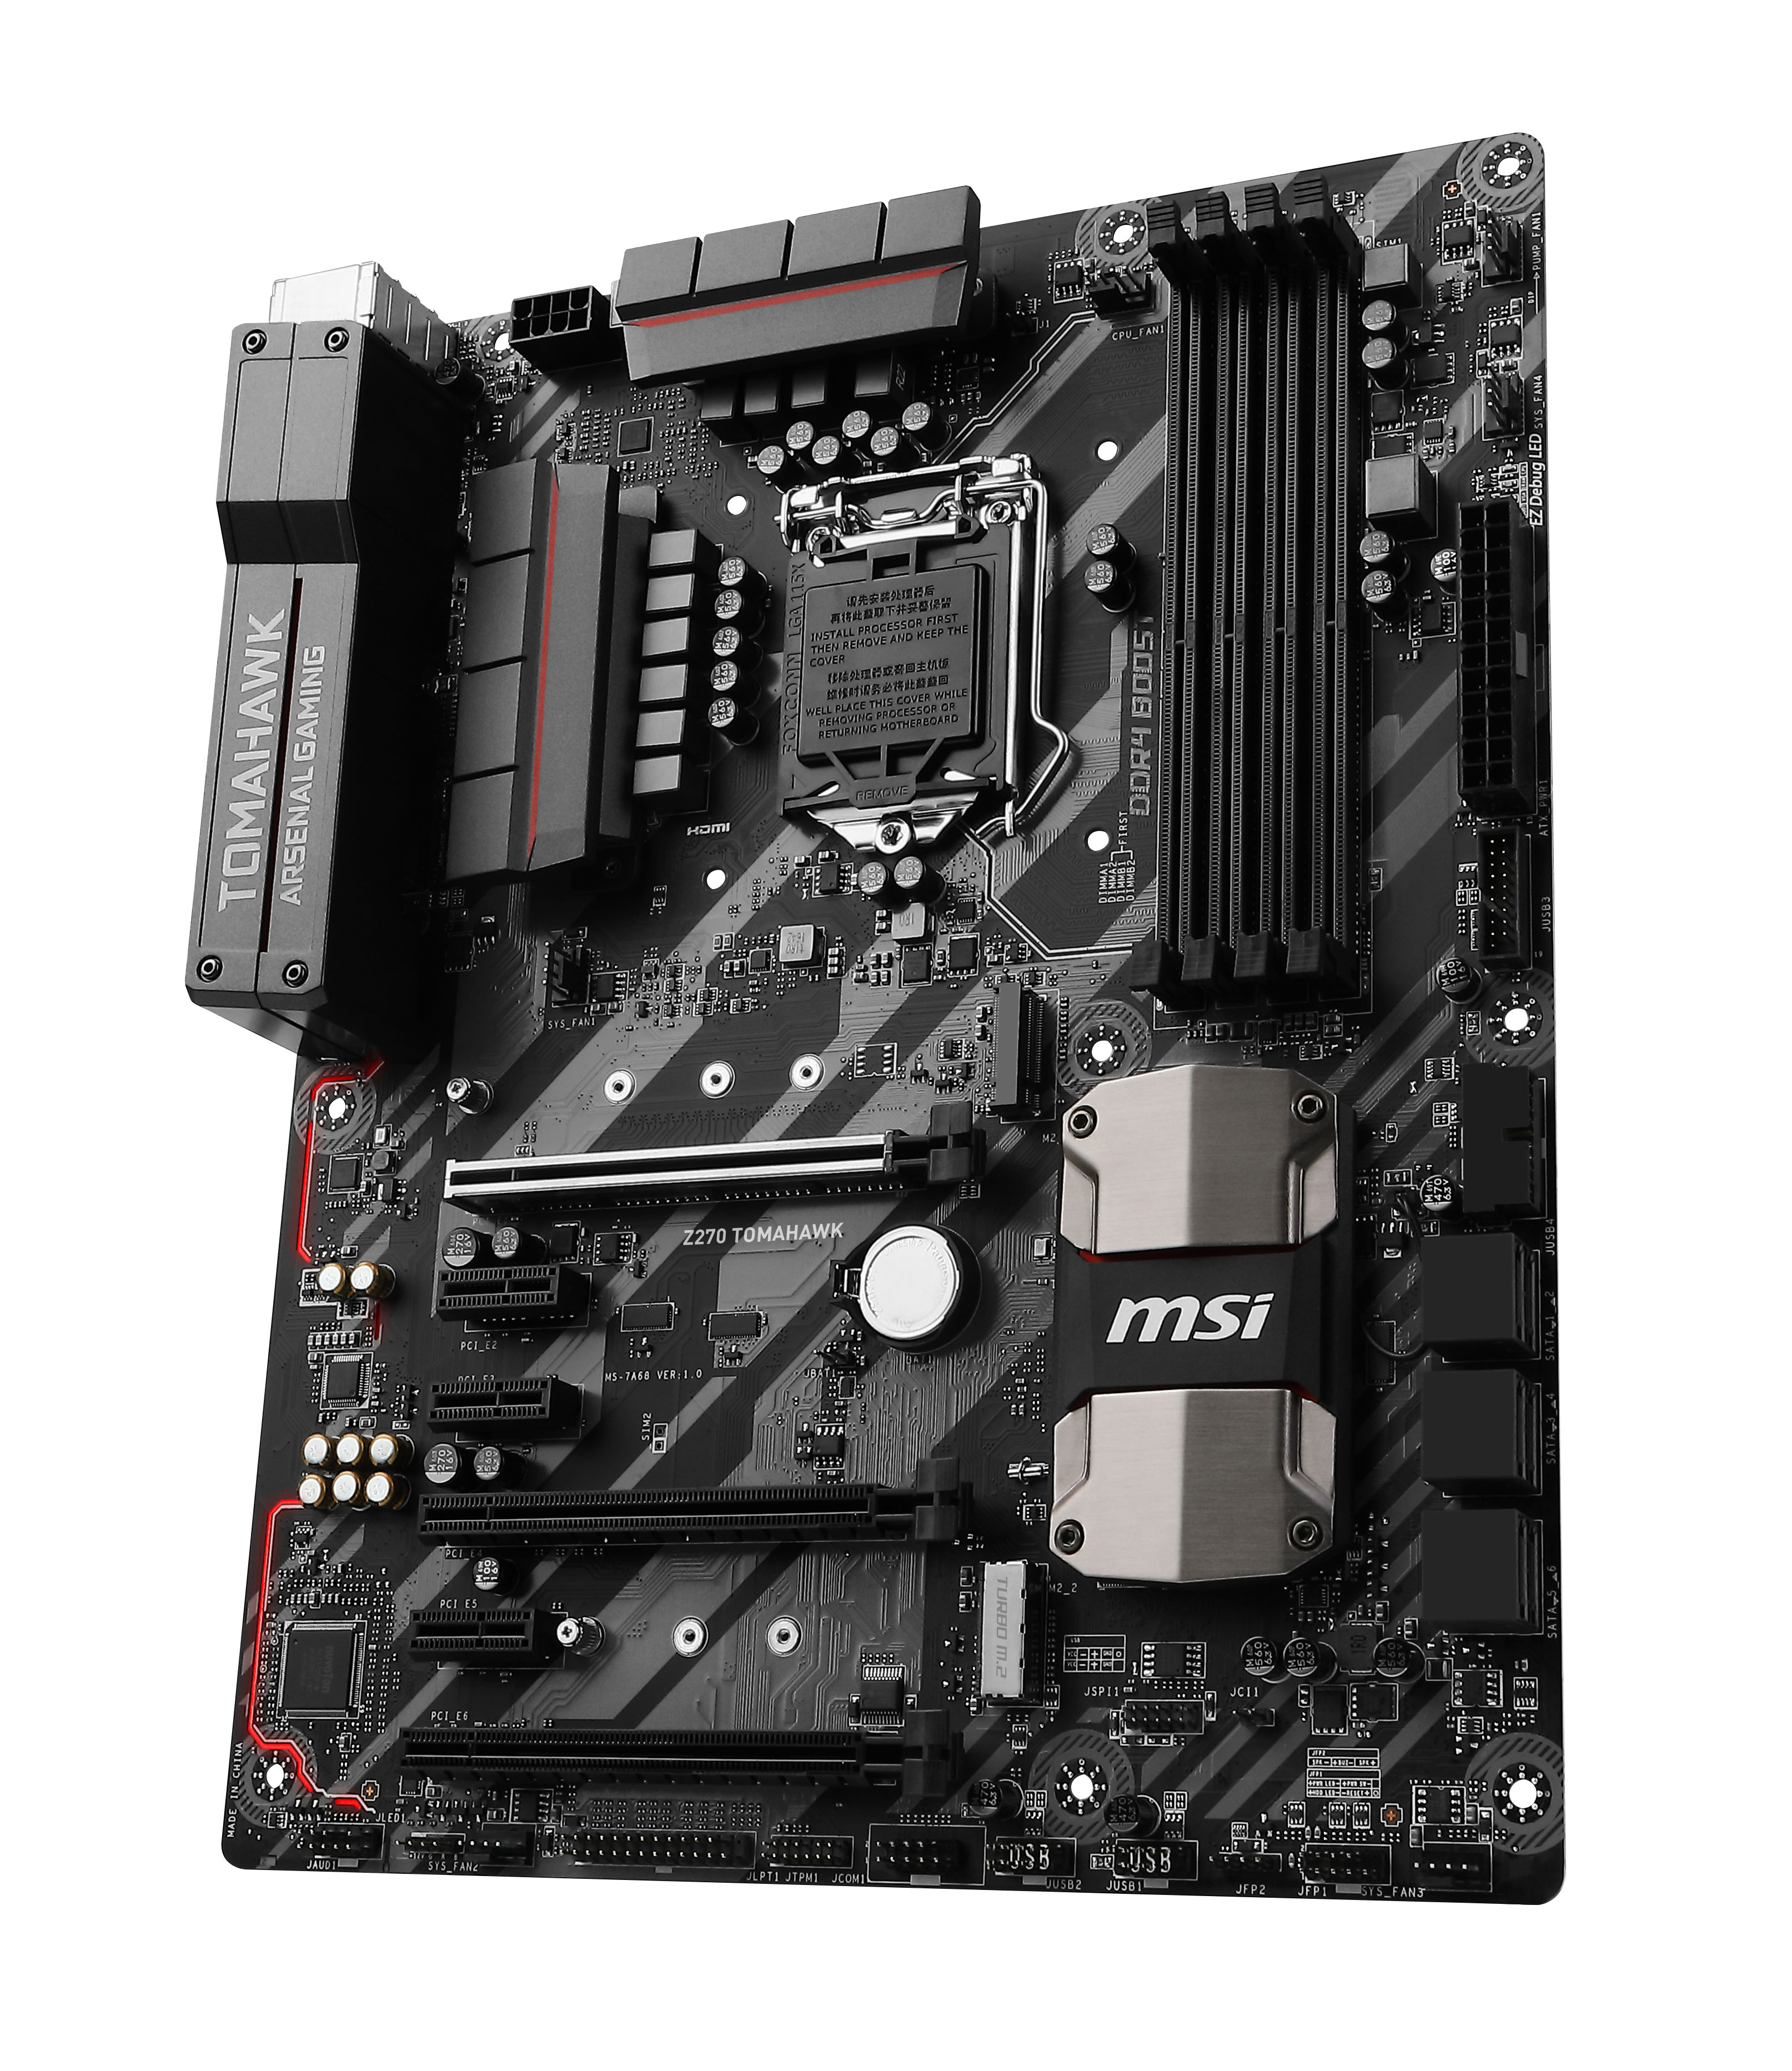 The Z270 TOMAHAWK gaming motherboard